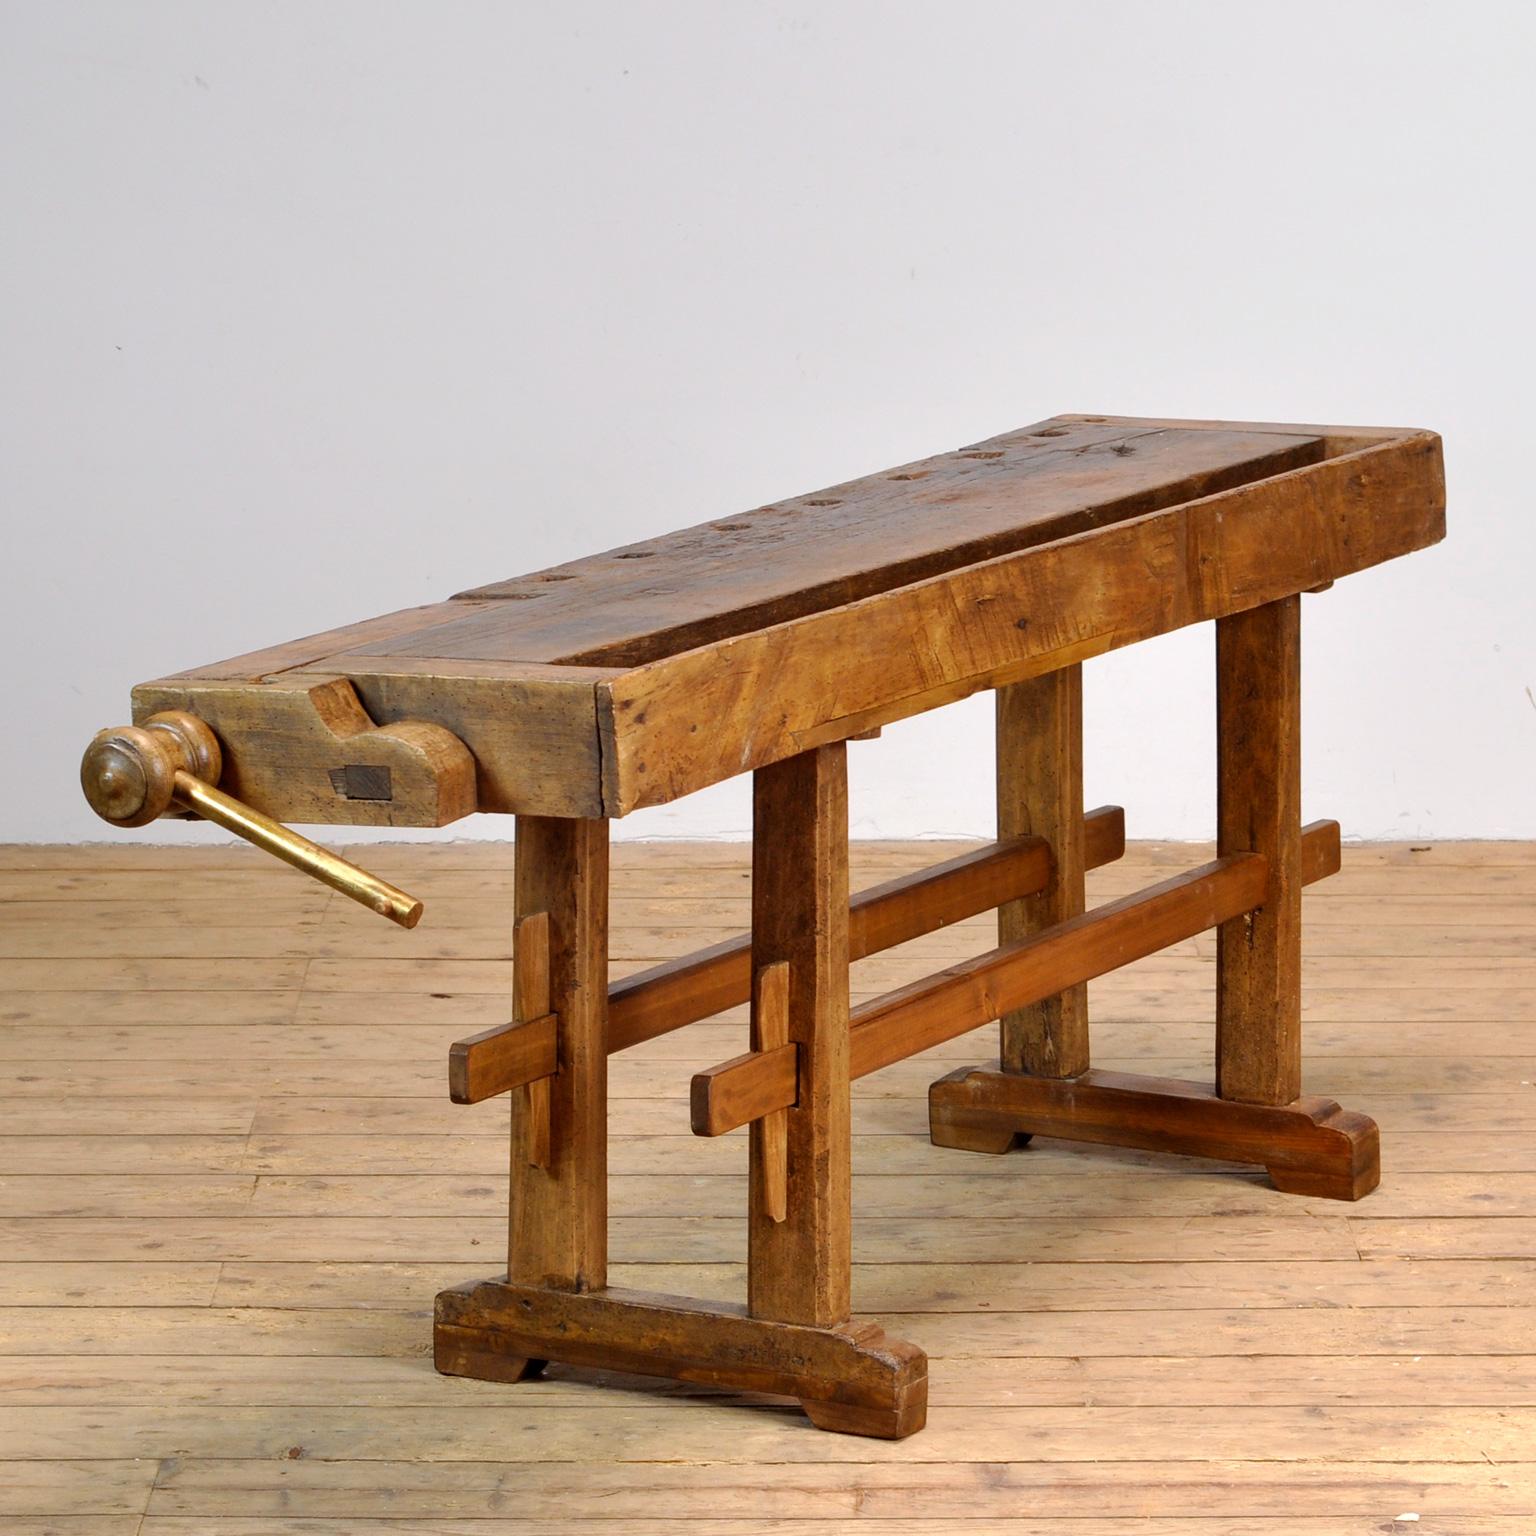 This antique workbench has one built-in wooden vices screw and a recessed tray where the carpenter would put his tools. It was manufactured around 1900. Made from oak. Beautiful patina after years of use. The workbench has been treated for woodworm,